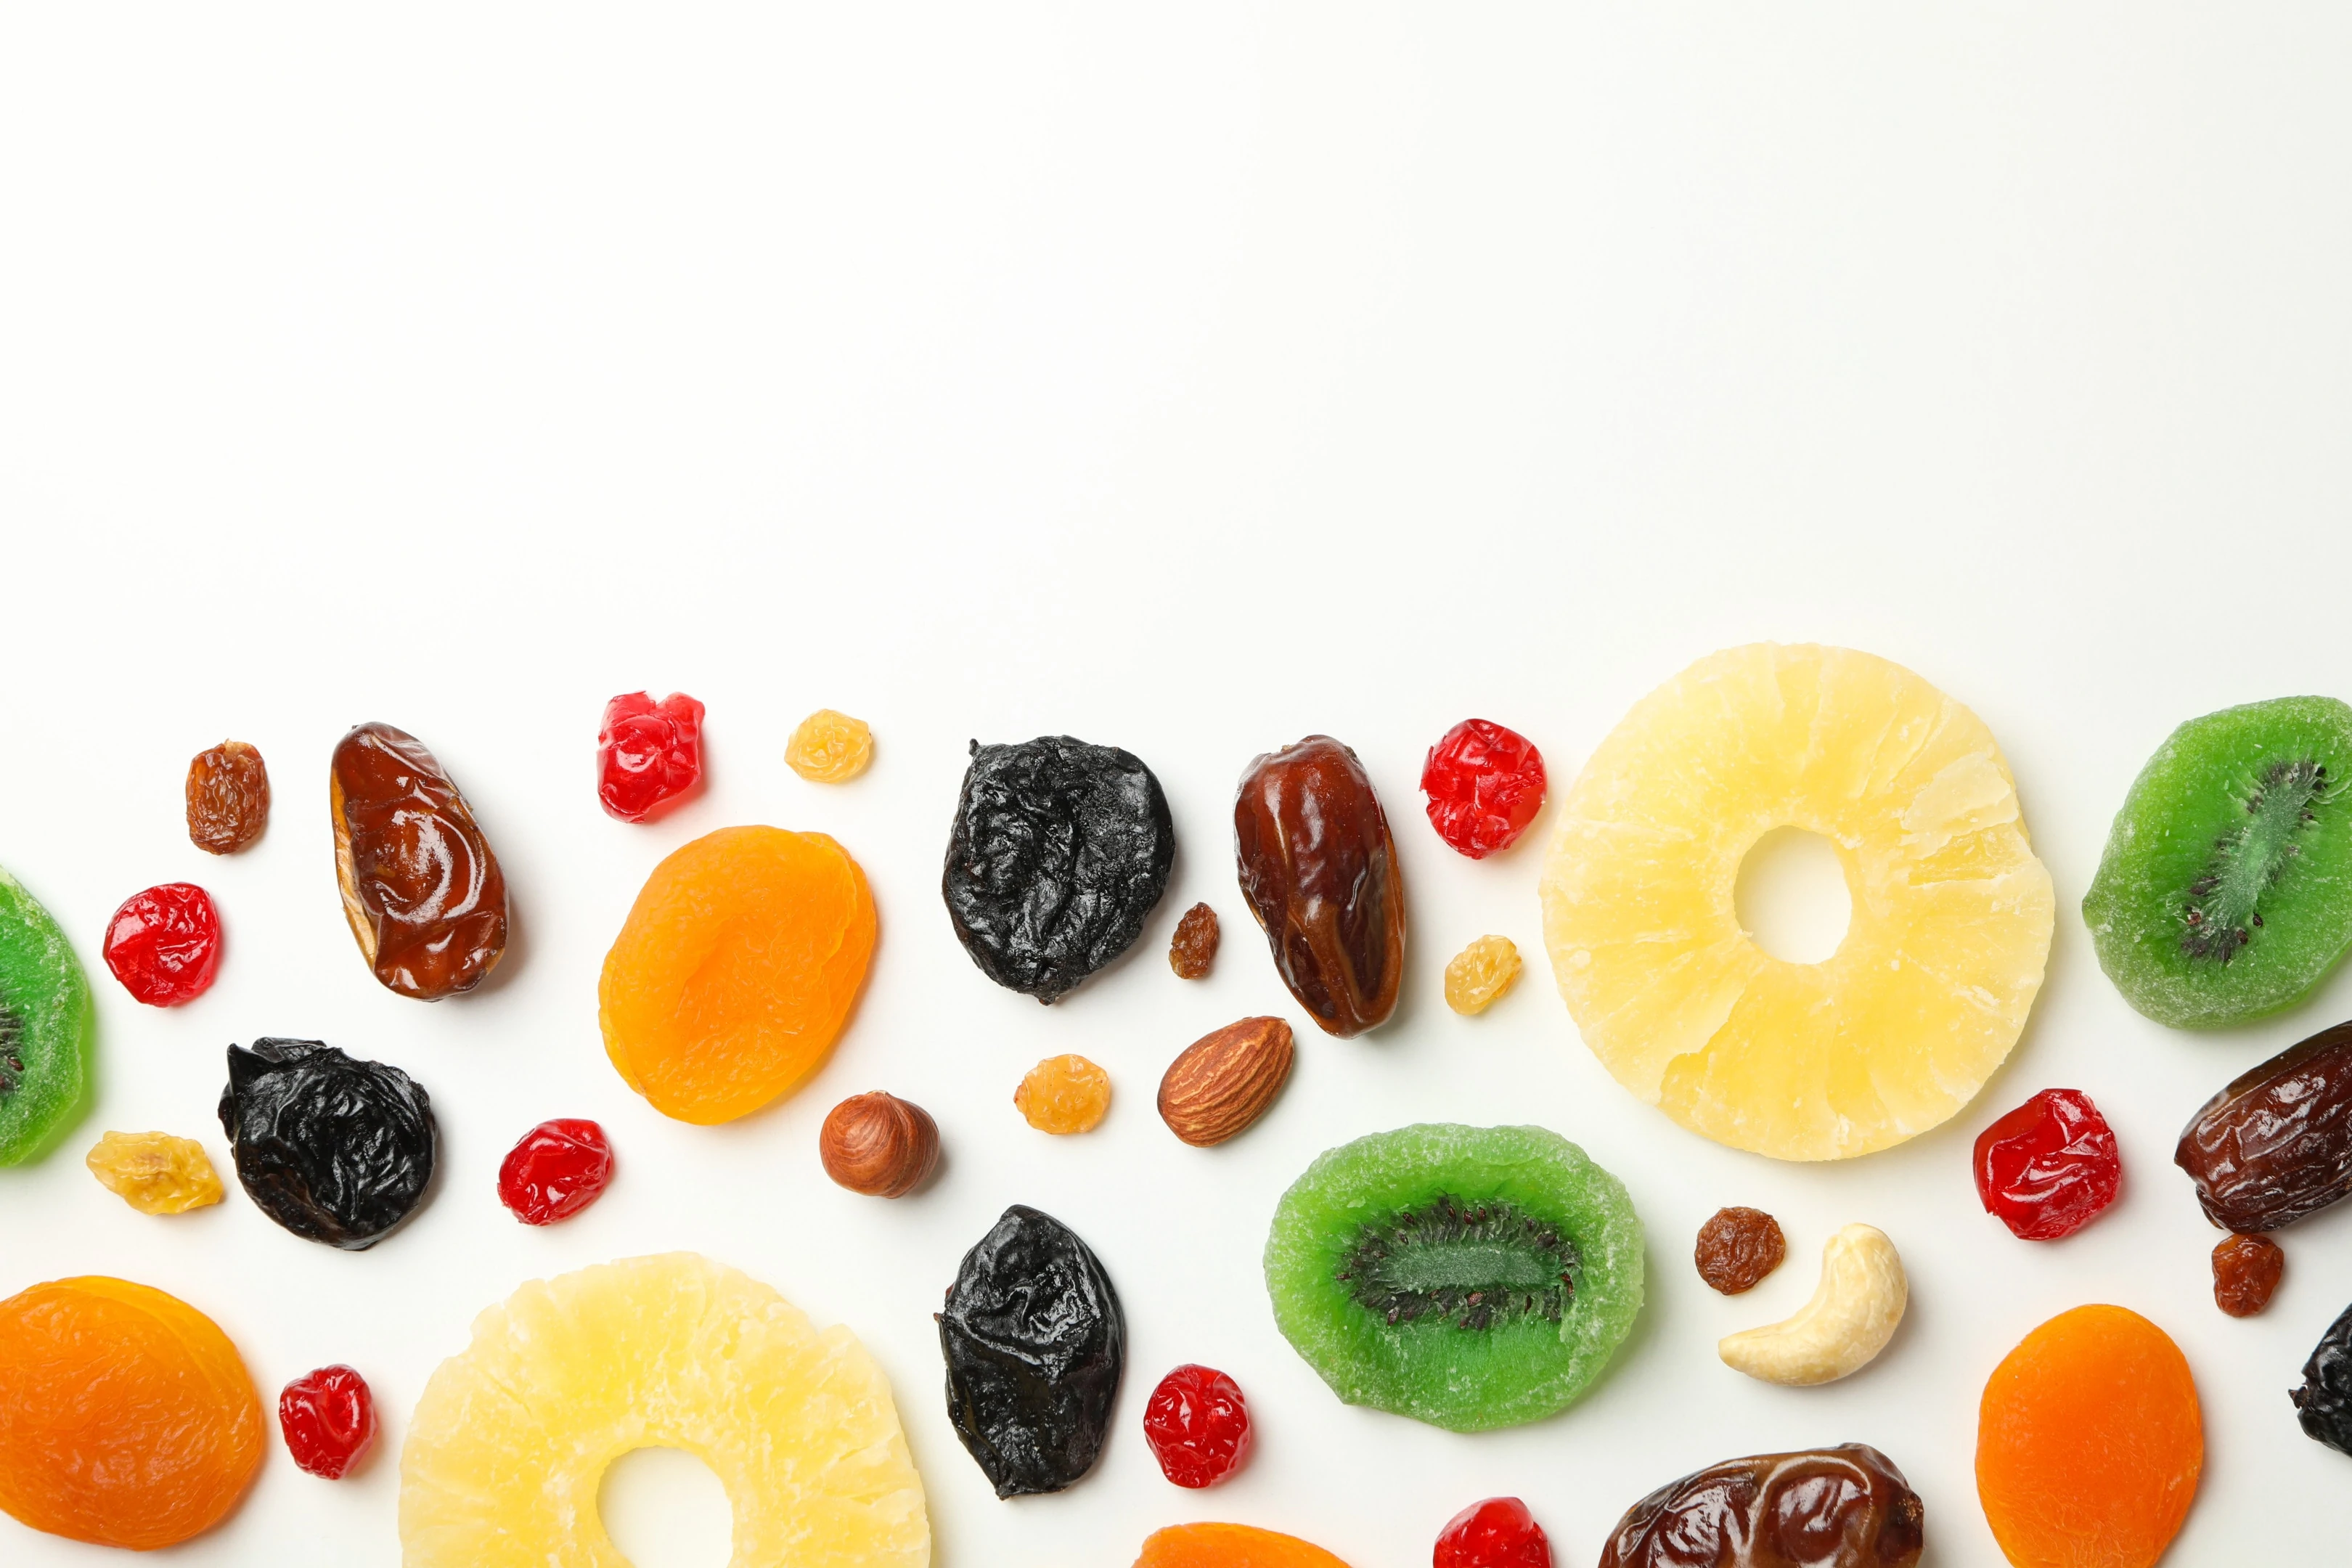 Dried fruits are one of the best non perishable foods for travel